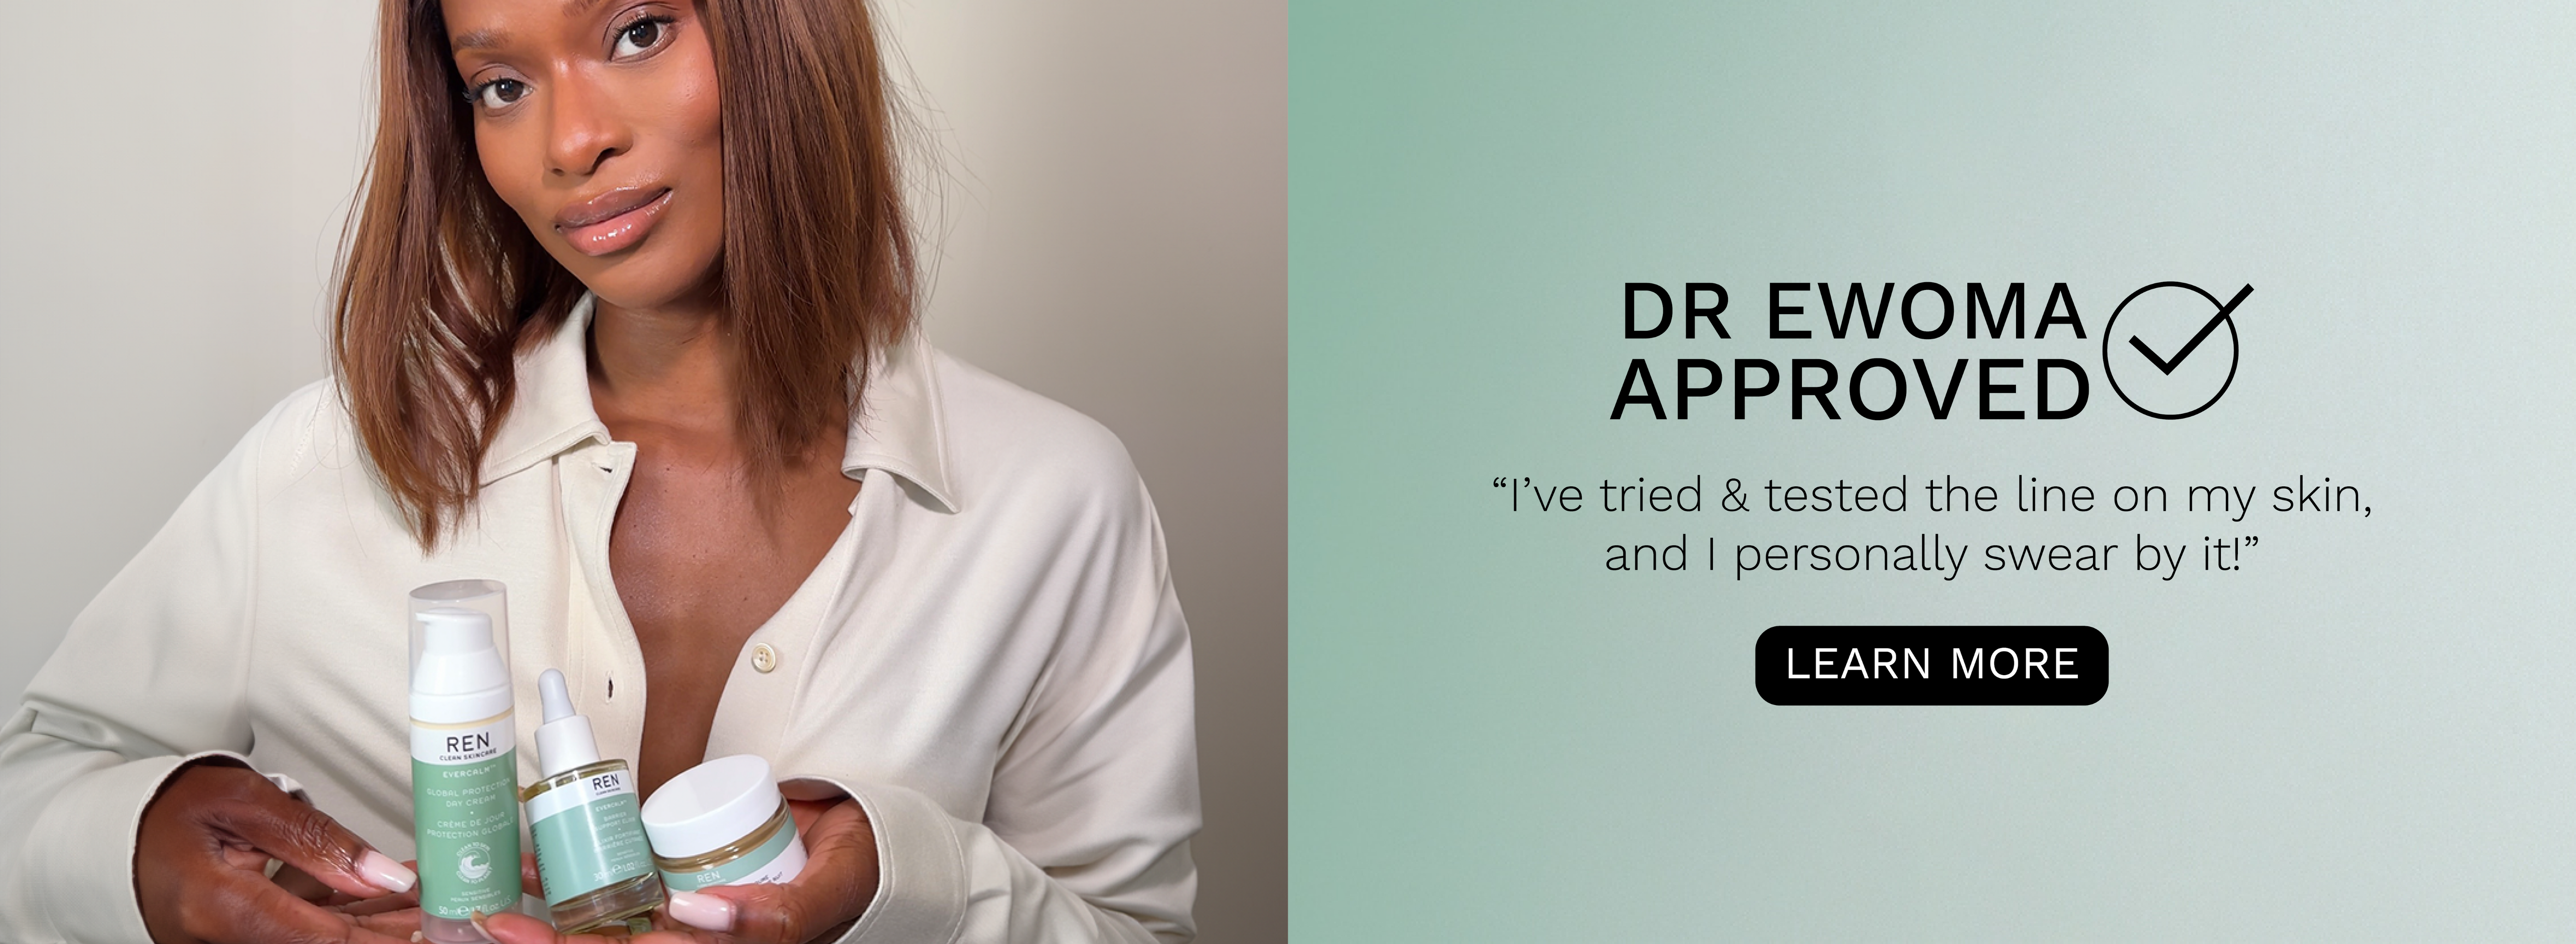 Dr Ewoma Approved. "I've tried and tested the line on my skin and i personally swear by it". Learn more.